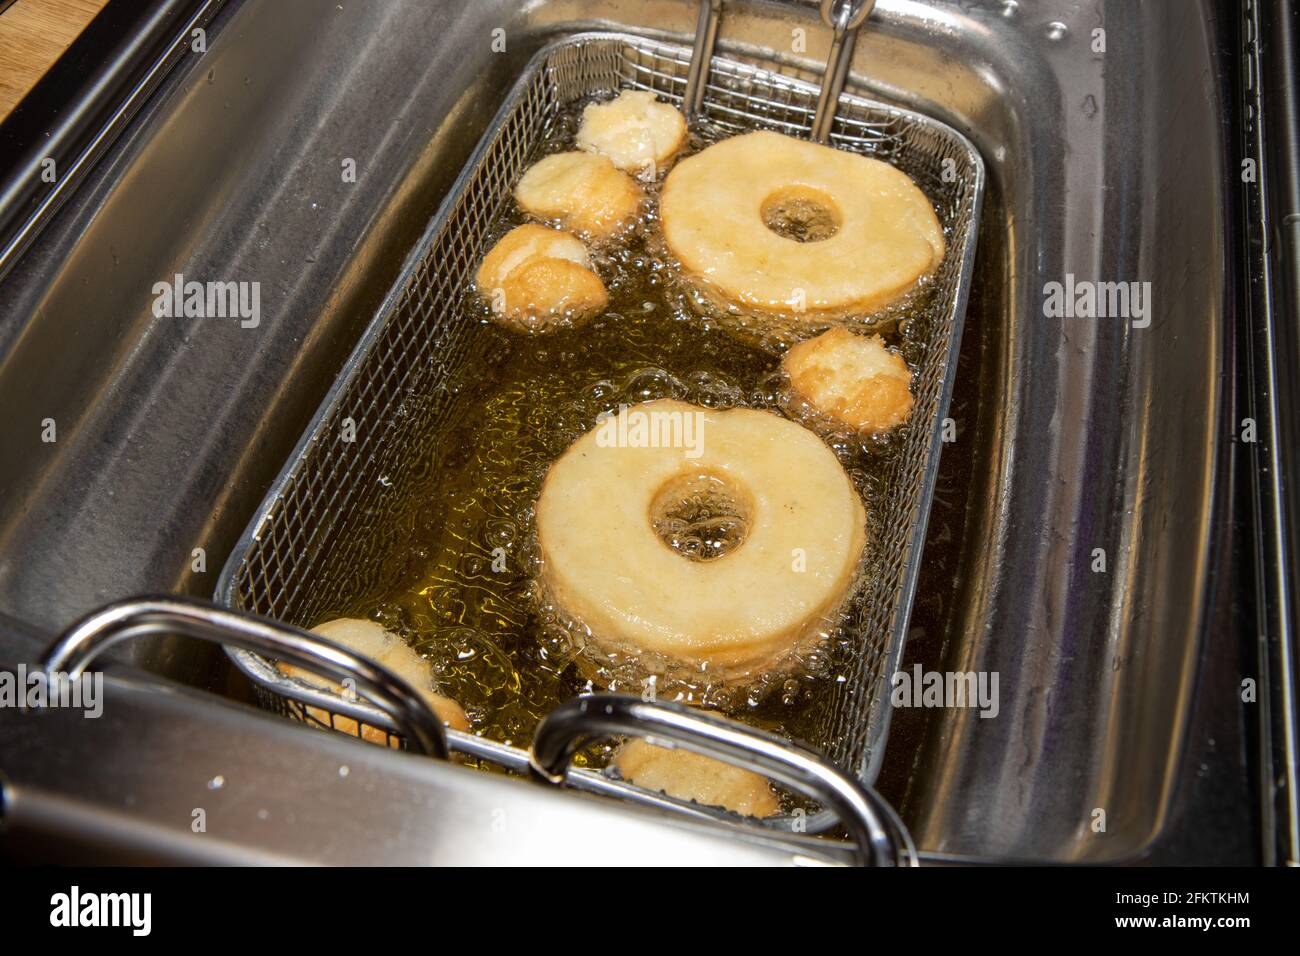 Delicious doughnuts and doughnut holes being cooked in a oil fryer showing the delicious snack frying in oil Stock Photo